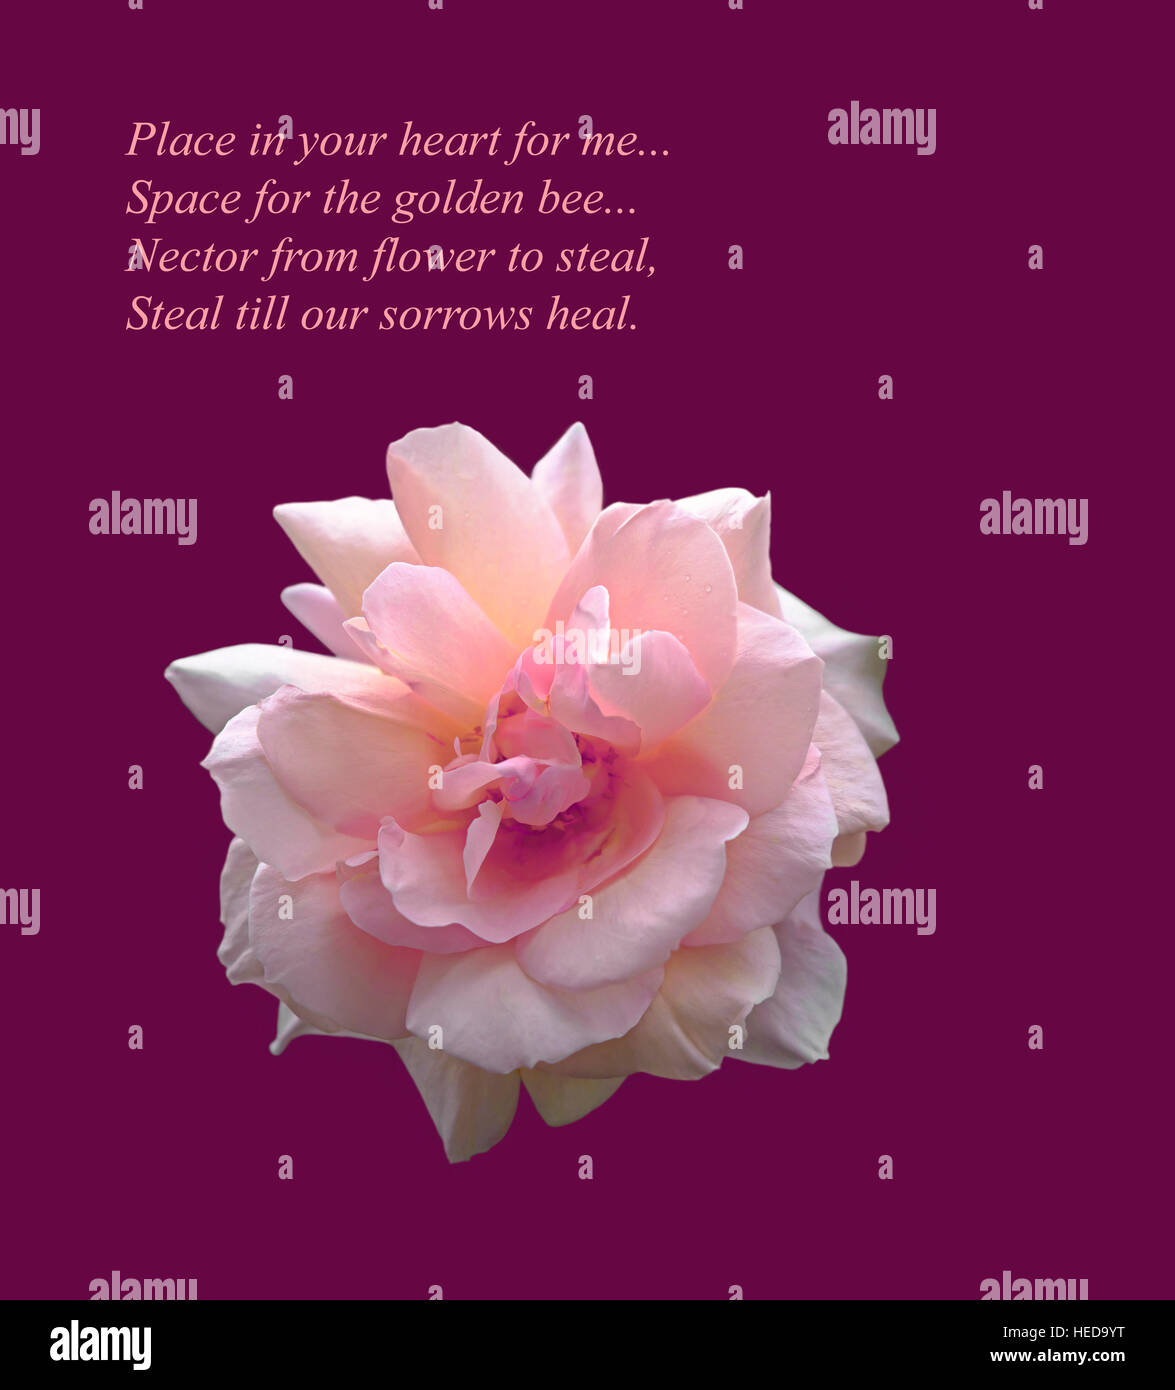 Beautiful pink rose cut-out on a purple background.  An original inspirational image and romantic verse by the poet Russ Merne. Stock Photo